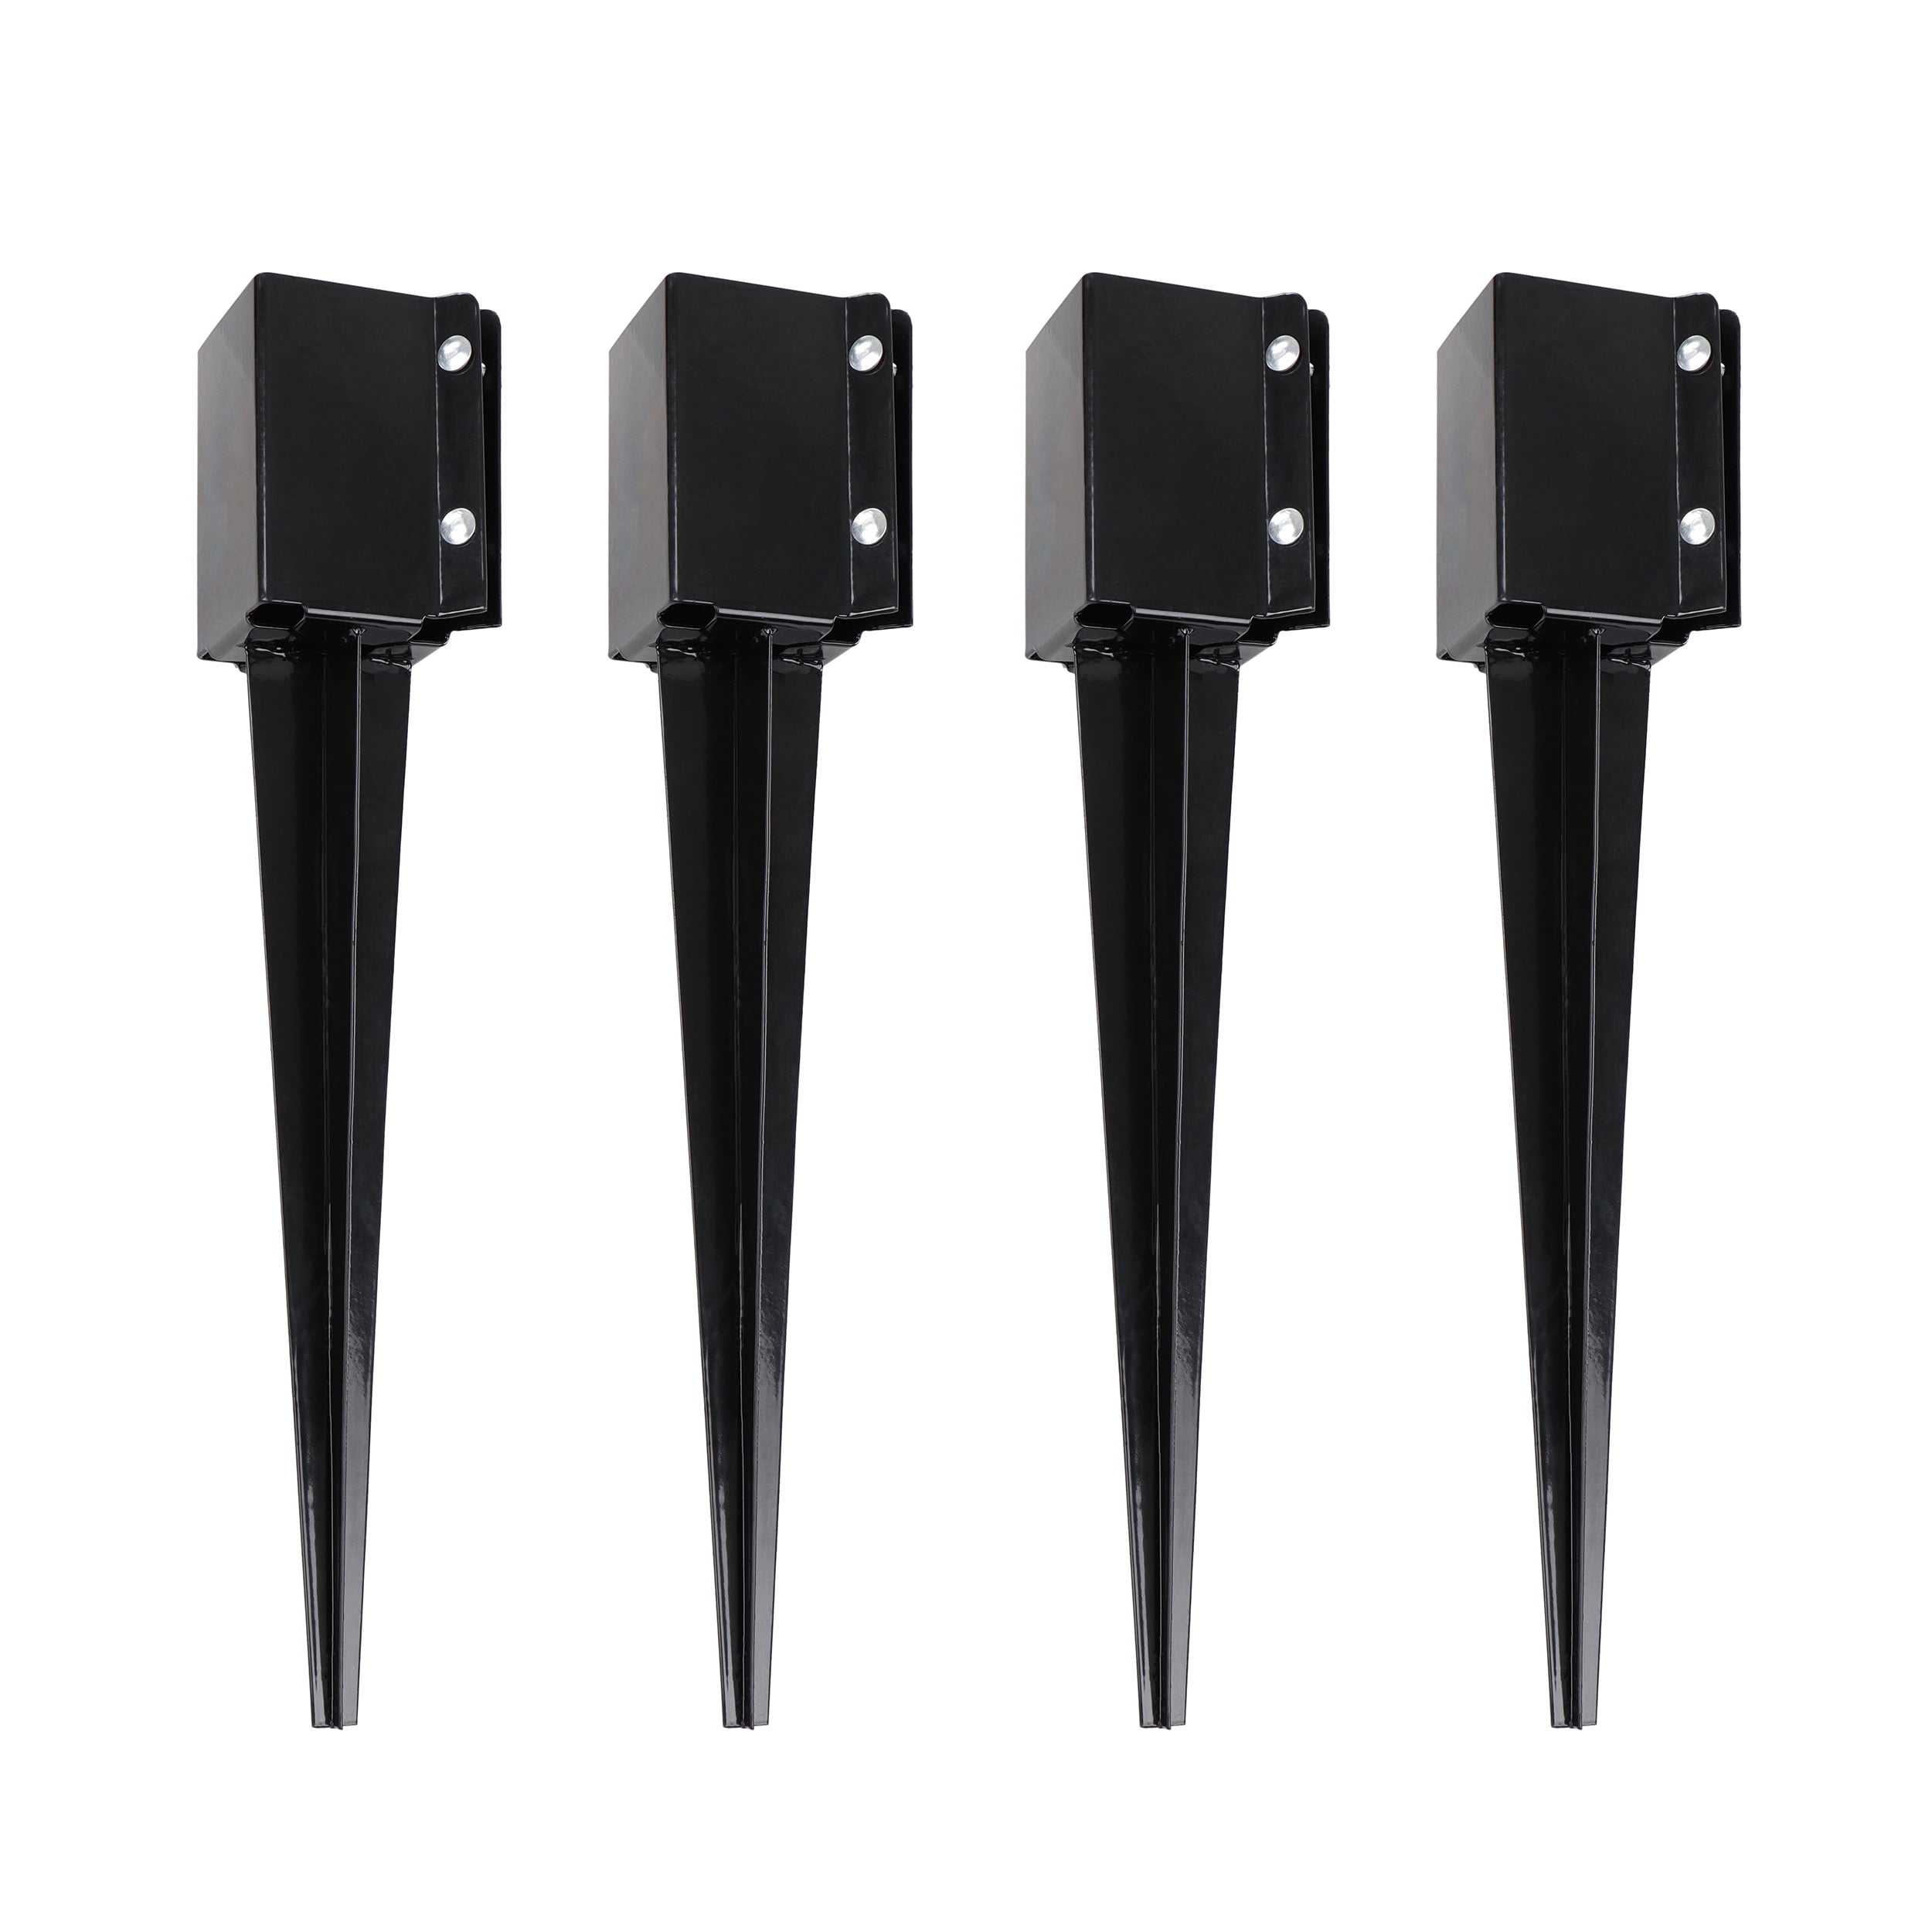 BISupply Fence Post Anchor Ground Spike Metal Fence Stakes 4-Pack - 24